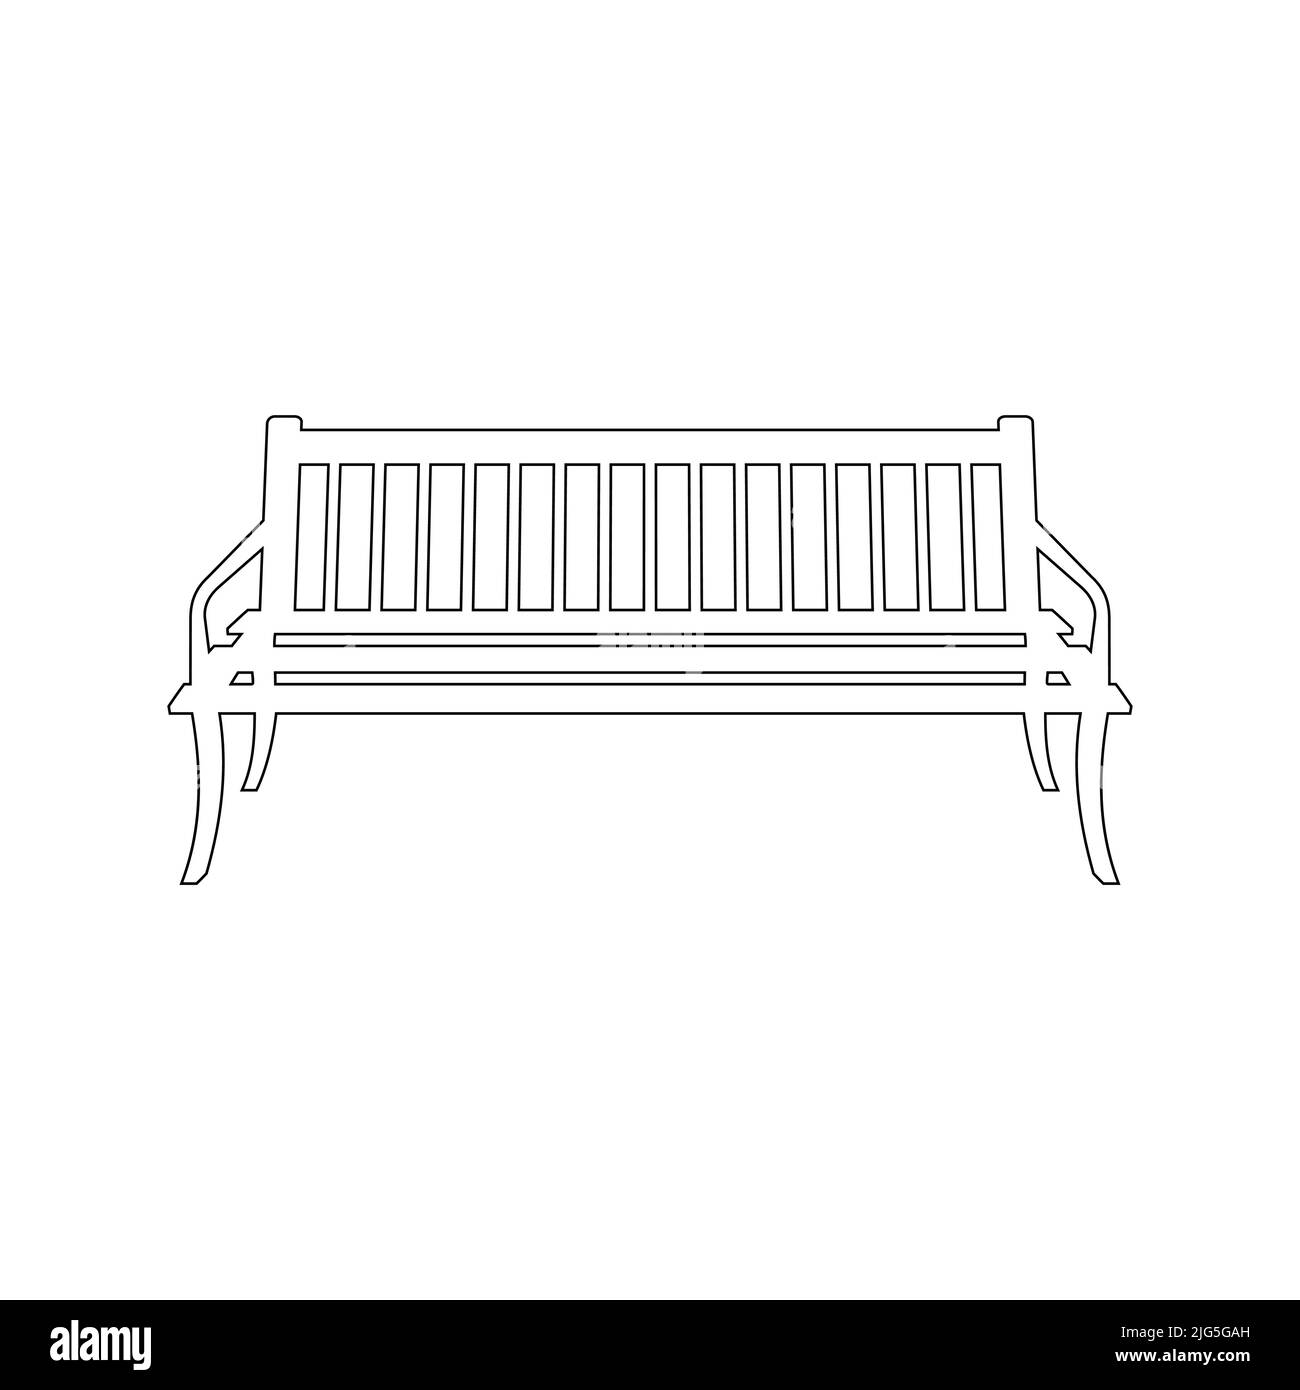 Garden bench, public park furniture design. Front view wooden bench with a backrest. Flat vector illustration isolated on white background. Stock Vector